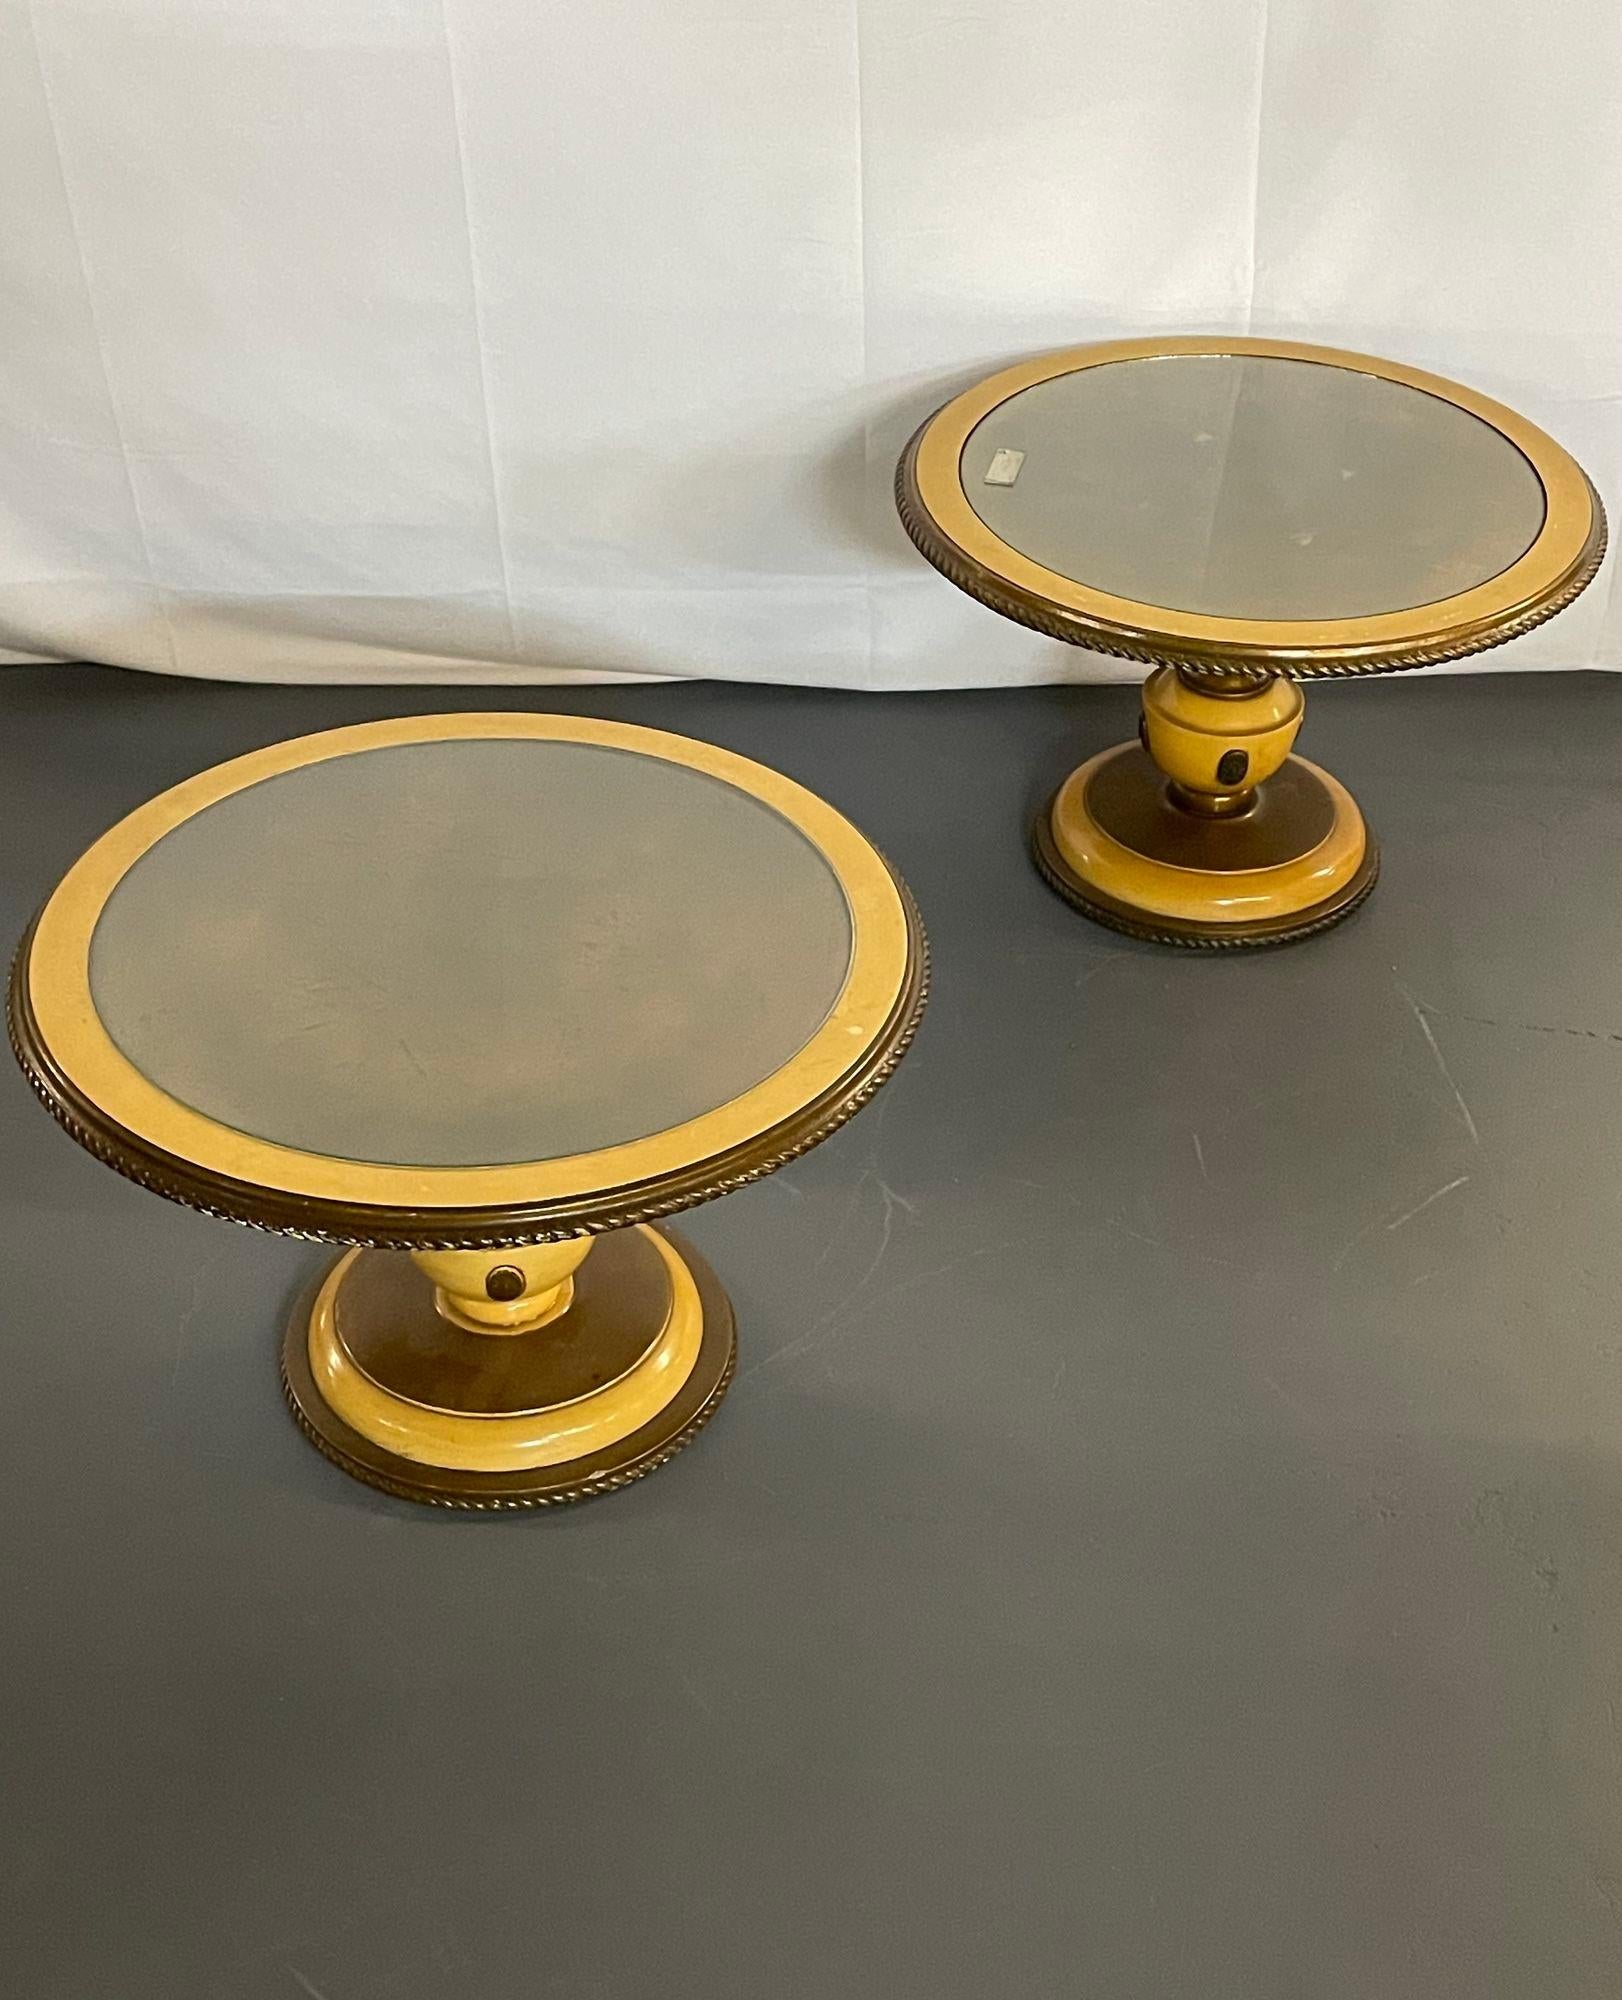 Pair of Neoclassical Low End / Side Tables, Jansen Style, Gilt, Glass Top
 
A pair of Italian gilt gold and paint decorated neoclassical, end tables in the manner of Mason Jansen. Each having a Gilt gold top under glass. The pair of a pedestal